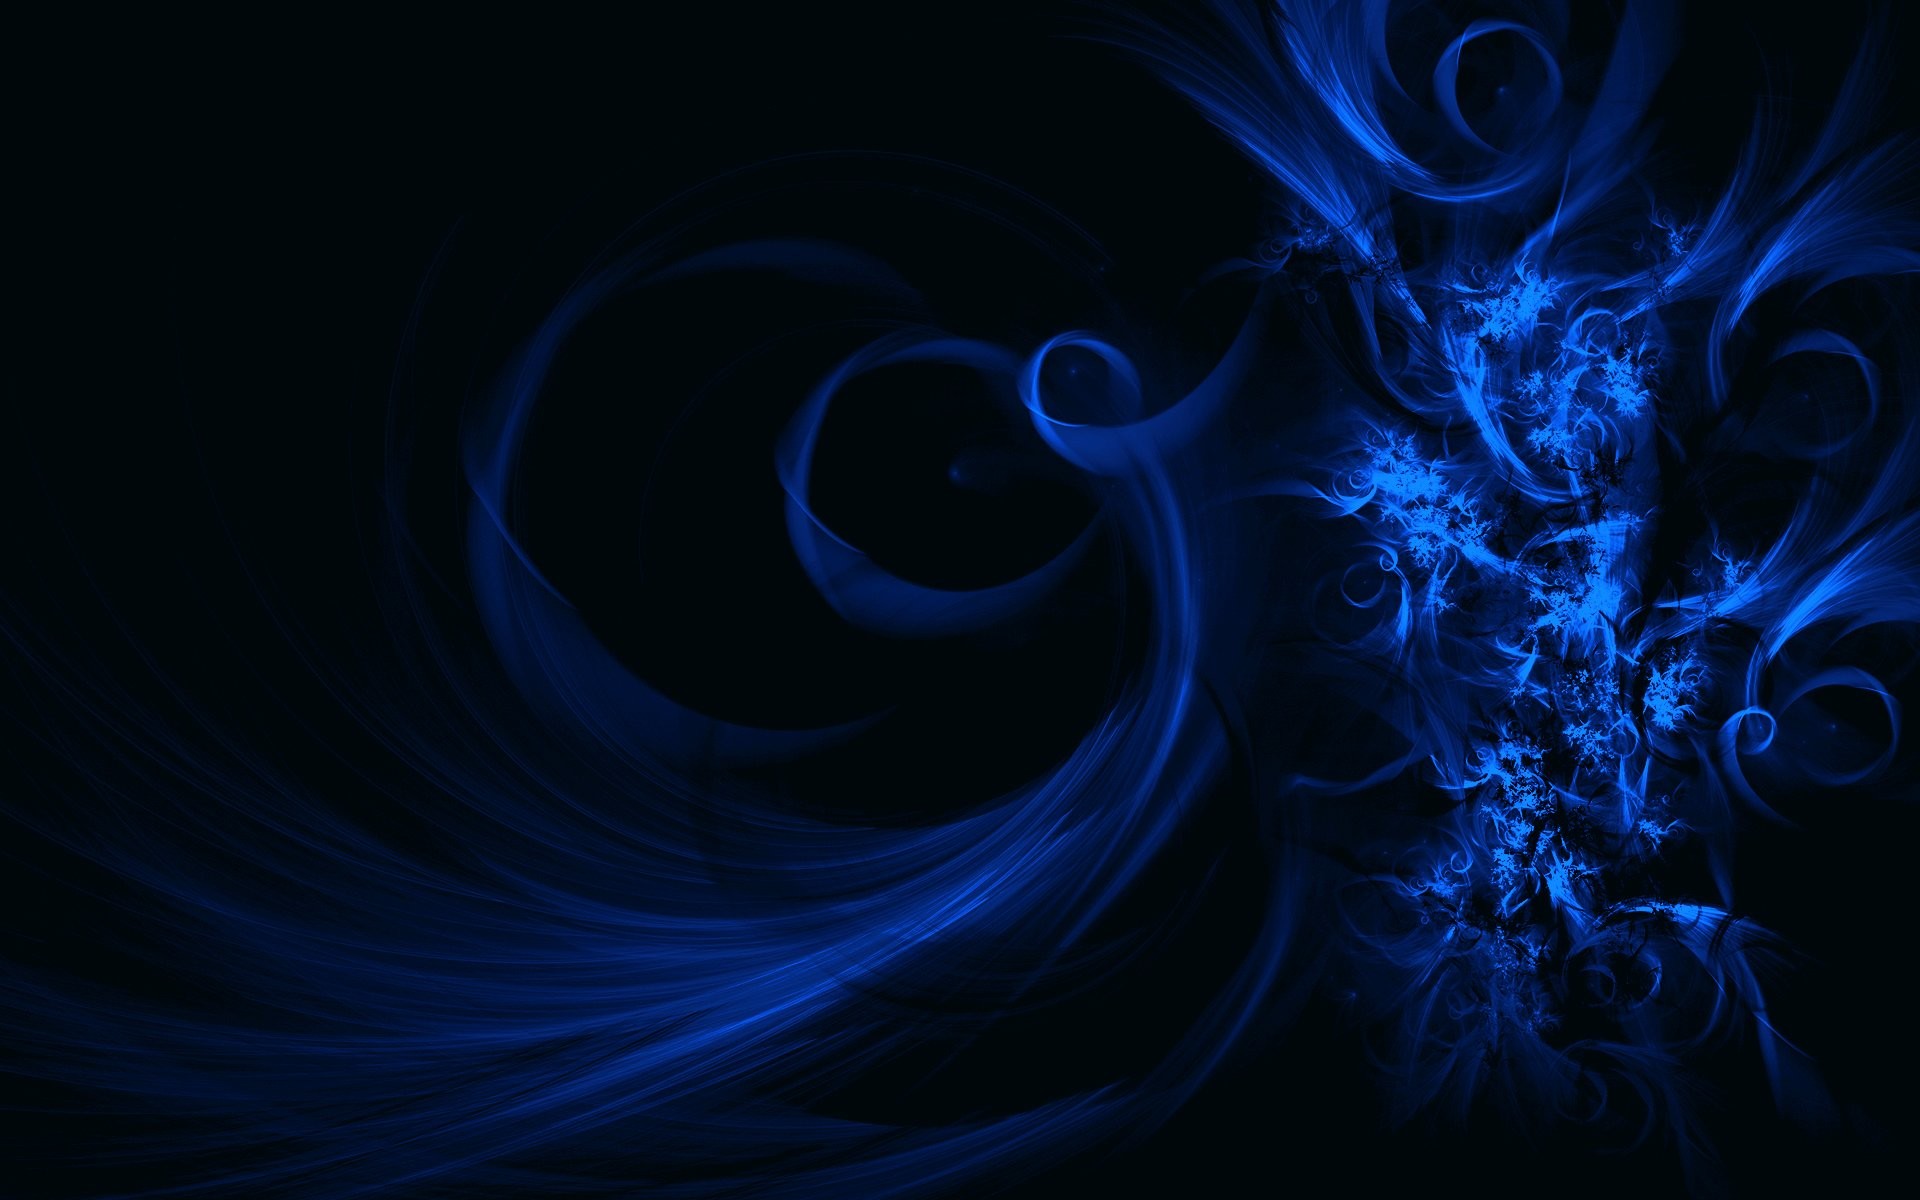 Awesome Dark Blue Color High Quality In HD Wallpaper Widescreen .